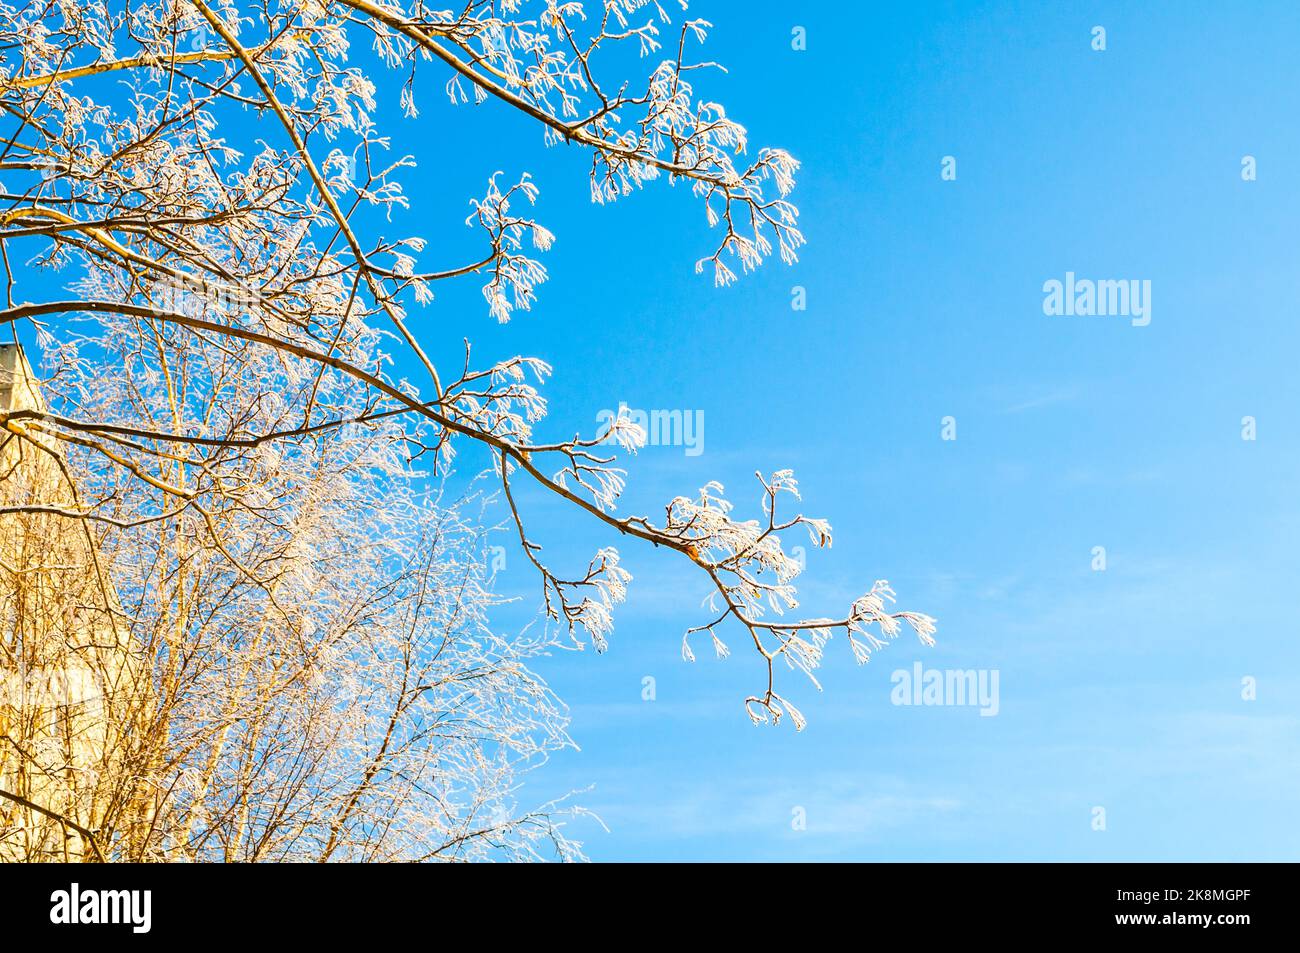 Winter landscape with winter forest snowy tree branches against blue sky in sunny weather Stock Photo